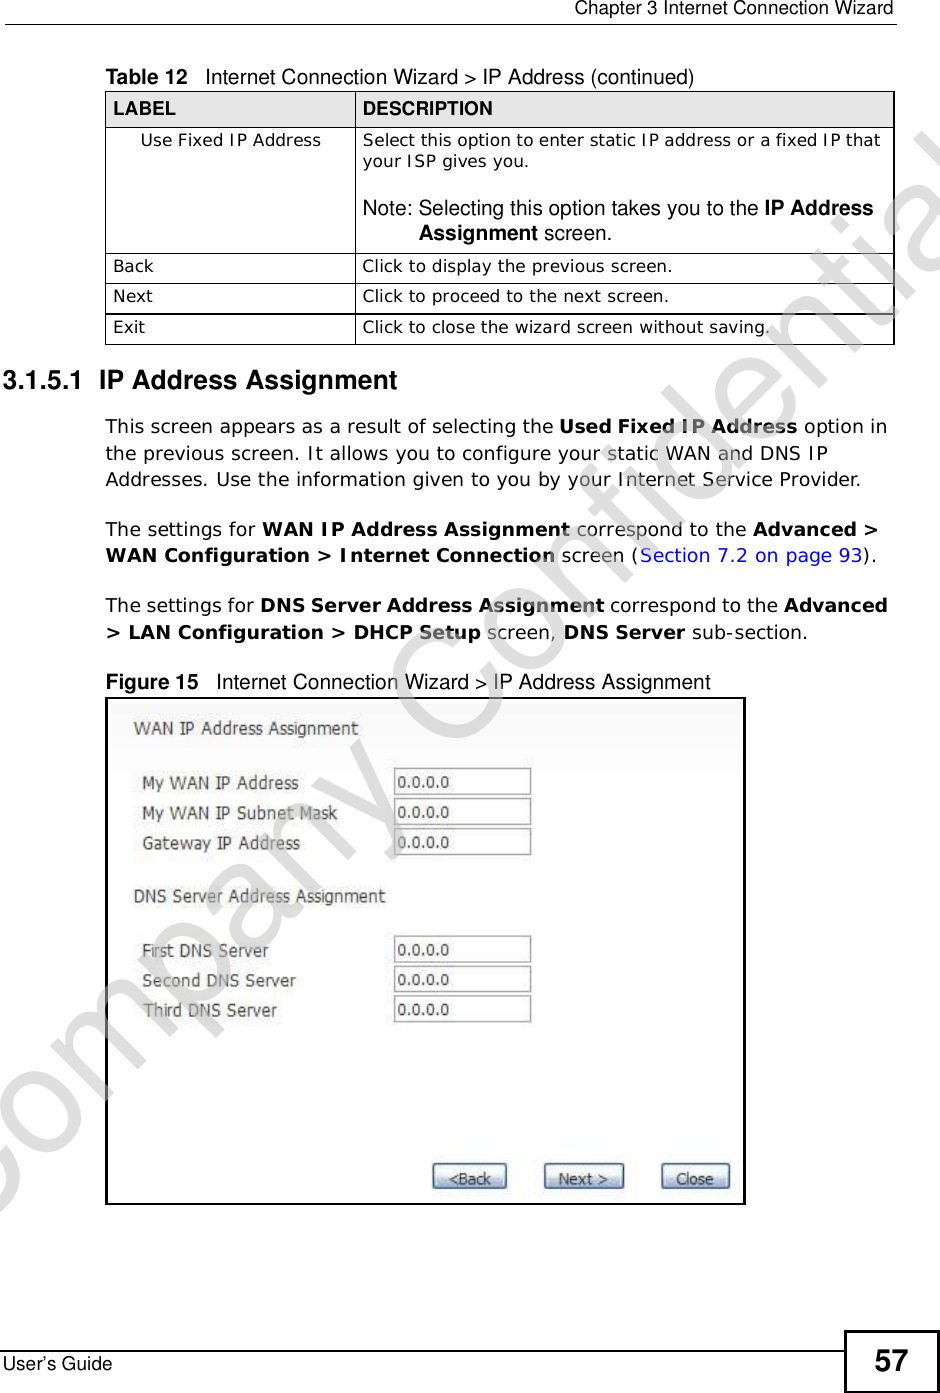  Chapter 3Internet Connection WizardUser’s Guide 573.1.5.1  IP Address AssignmentThis screen appears as a result of selecting the Used Fixed IP Address option in the previous screen. It allows you to configure your static WAN and DNS IP Addresses. Use the information given to you by your Internet Service Provider. The settings for WAN IP Address Assignment correspond to the Advanced &gt; WAN Configuration &gt; Internet Connection screen (Section 7.2 on page 93).The settings for DNS Server Address Assignment correspond to the Advanced&gt; LAN Configuration &gt; DHCP Setup screen, DNS Server sub-section.Figure 15   Internet Connection Wizard &gt; IP Address AssignmentUse Fixed IP AddressSelect this option to enter static IP address or a fixed IP that your ISP gives you.Note: Selecting this option takes you to the IP Address Assignment screen.BackClick to display the previous screen.Next Click to proceed to the next screen.Exit Click to close the wizard screen without saving.Table 12   Internet Connection Wizard &gt; IP Address (continued)LABEL DESCRIPTIONCompany Confidential